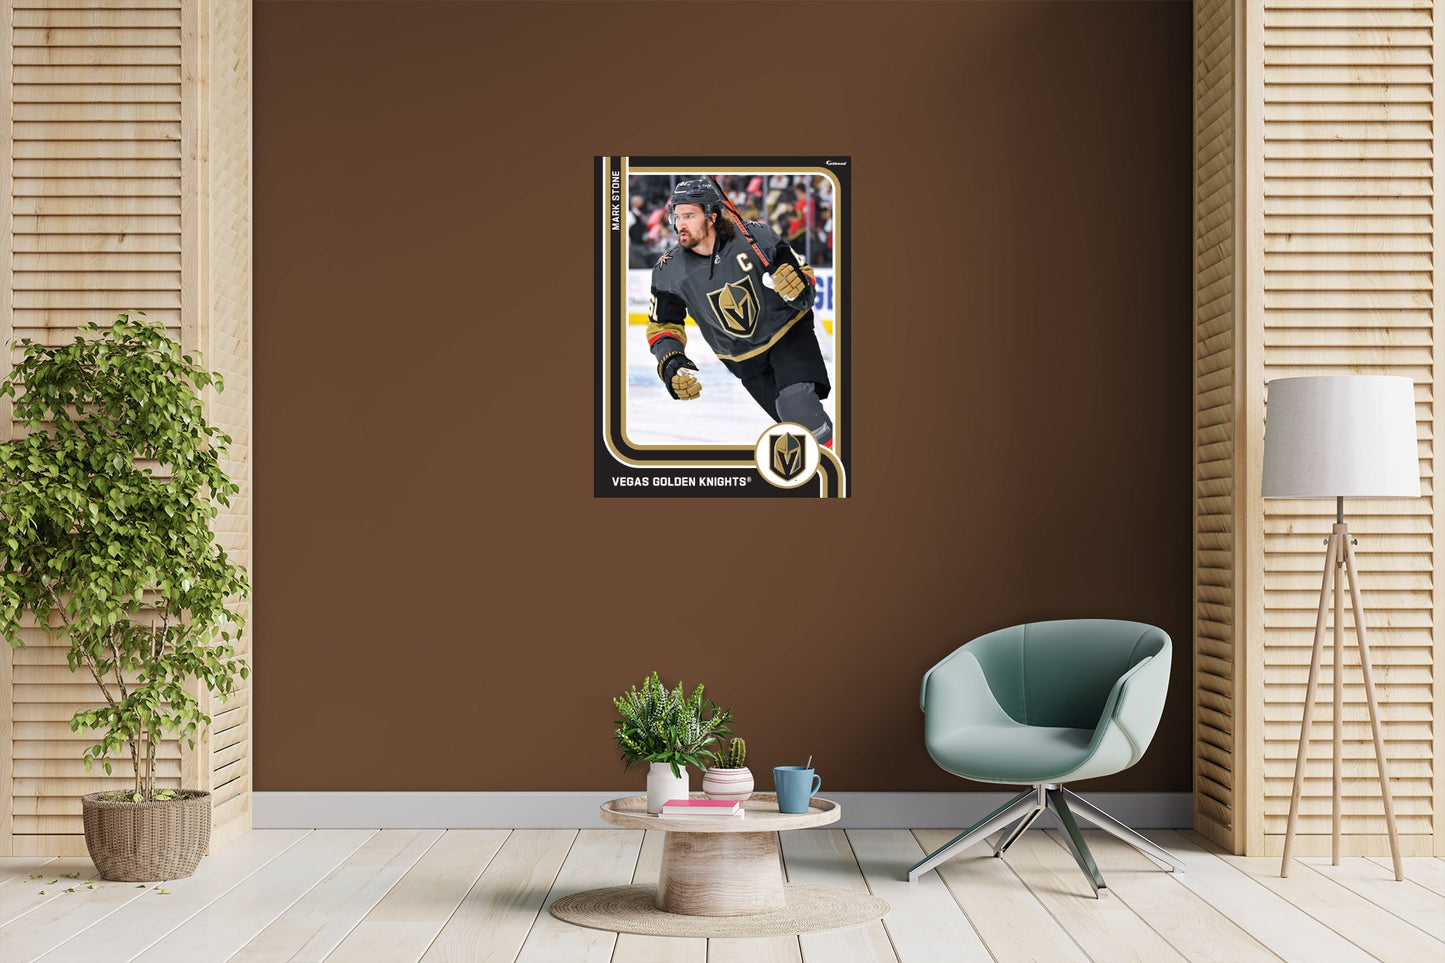 Vegas Golden Knights: Mark Stone Poster - Officially Licensed NHL Removable Adhesive Decal